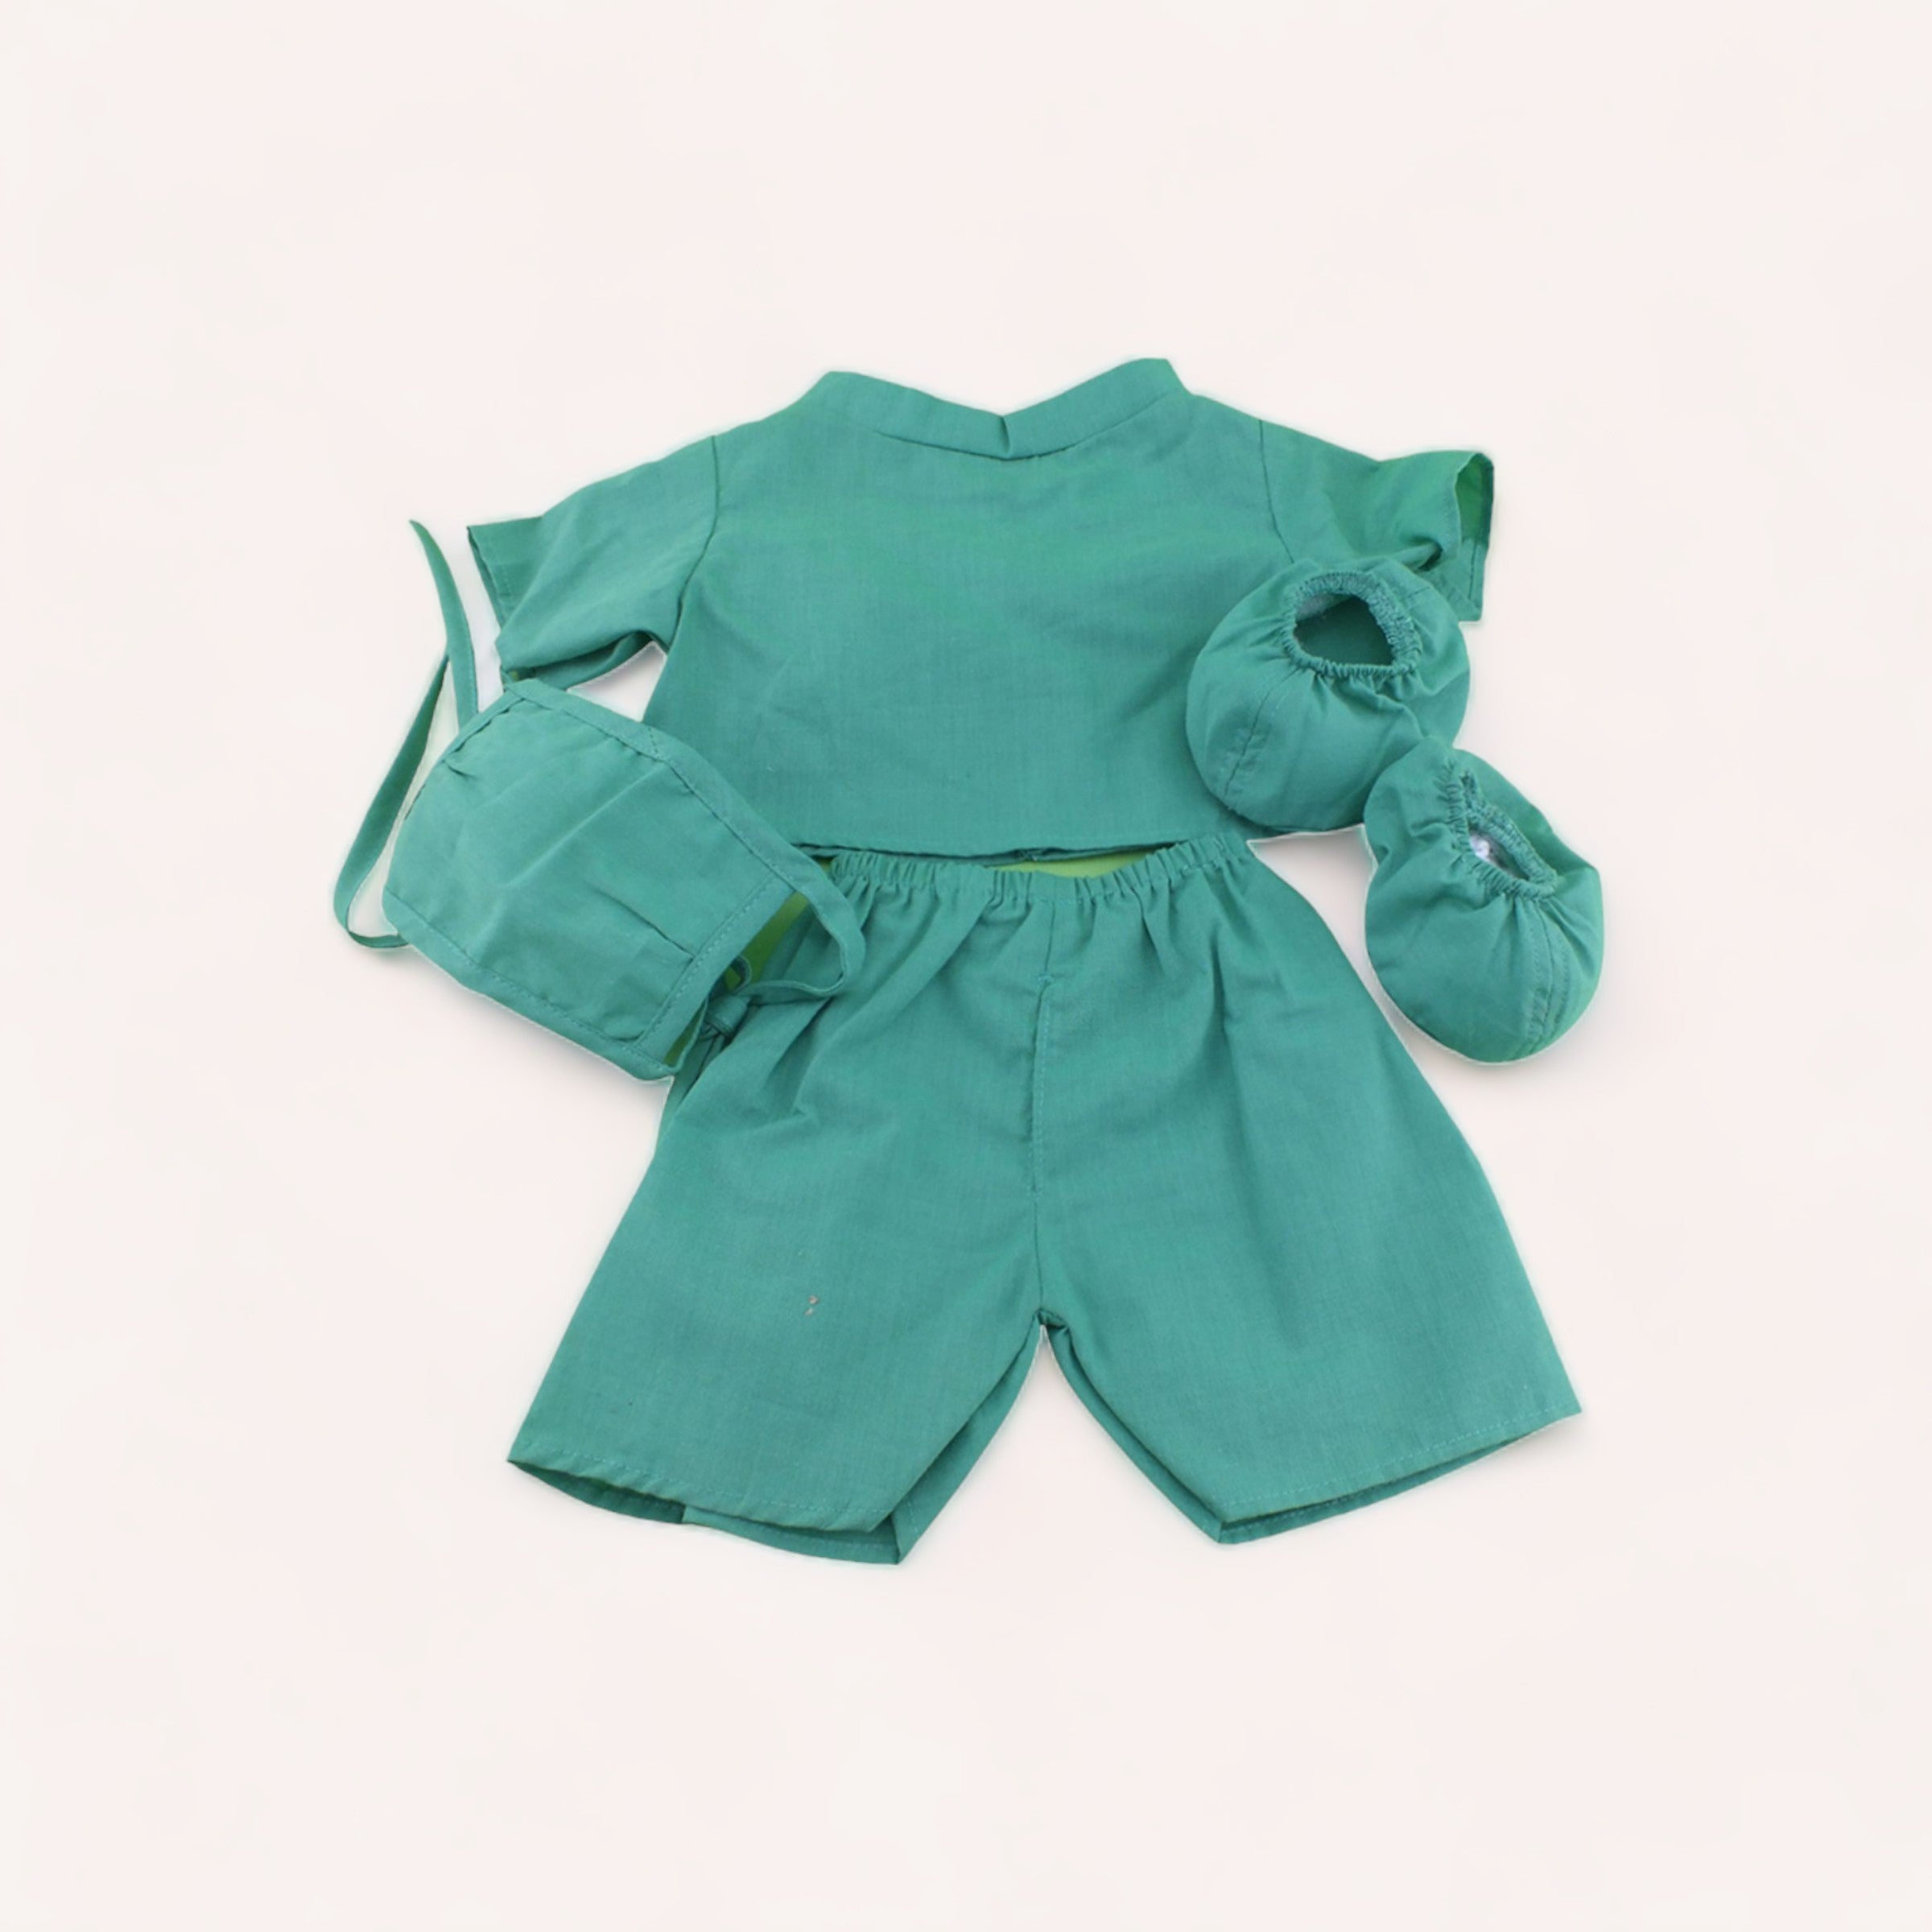 A neatly displayed set of teal baby clothes, including a shirt, shorts, and a pair of booties on a white background, perfect for imaginative play with their favorite teddy bear in The Teddy Factory's Bear Doctor Outfit.